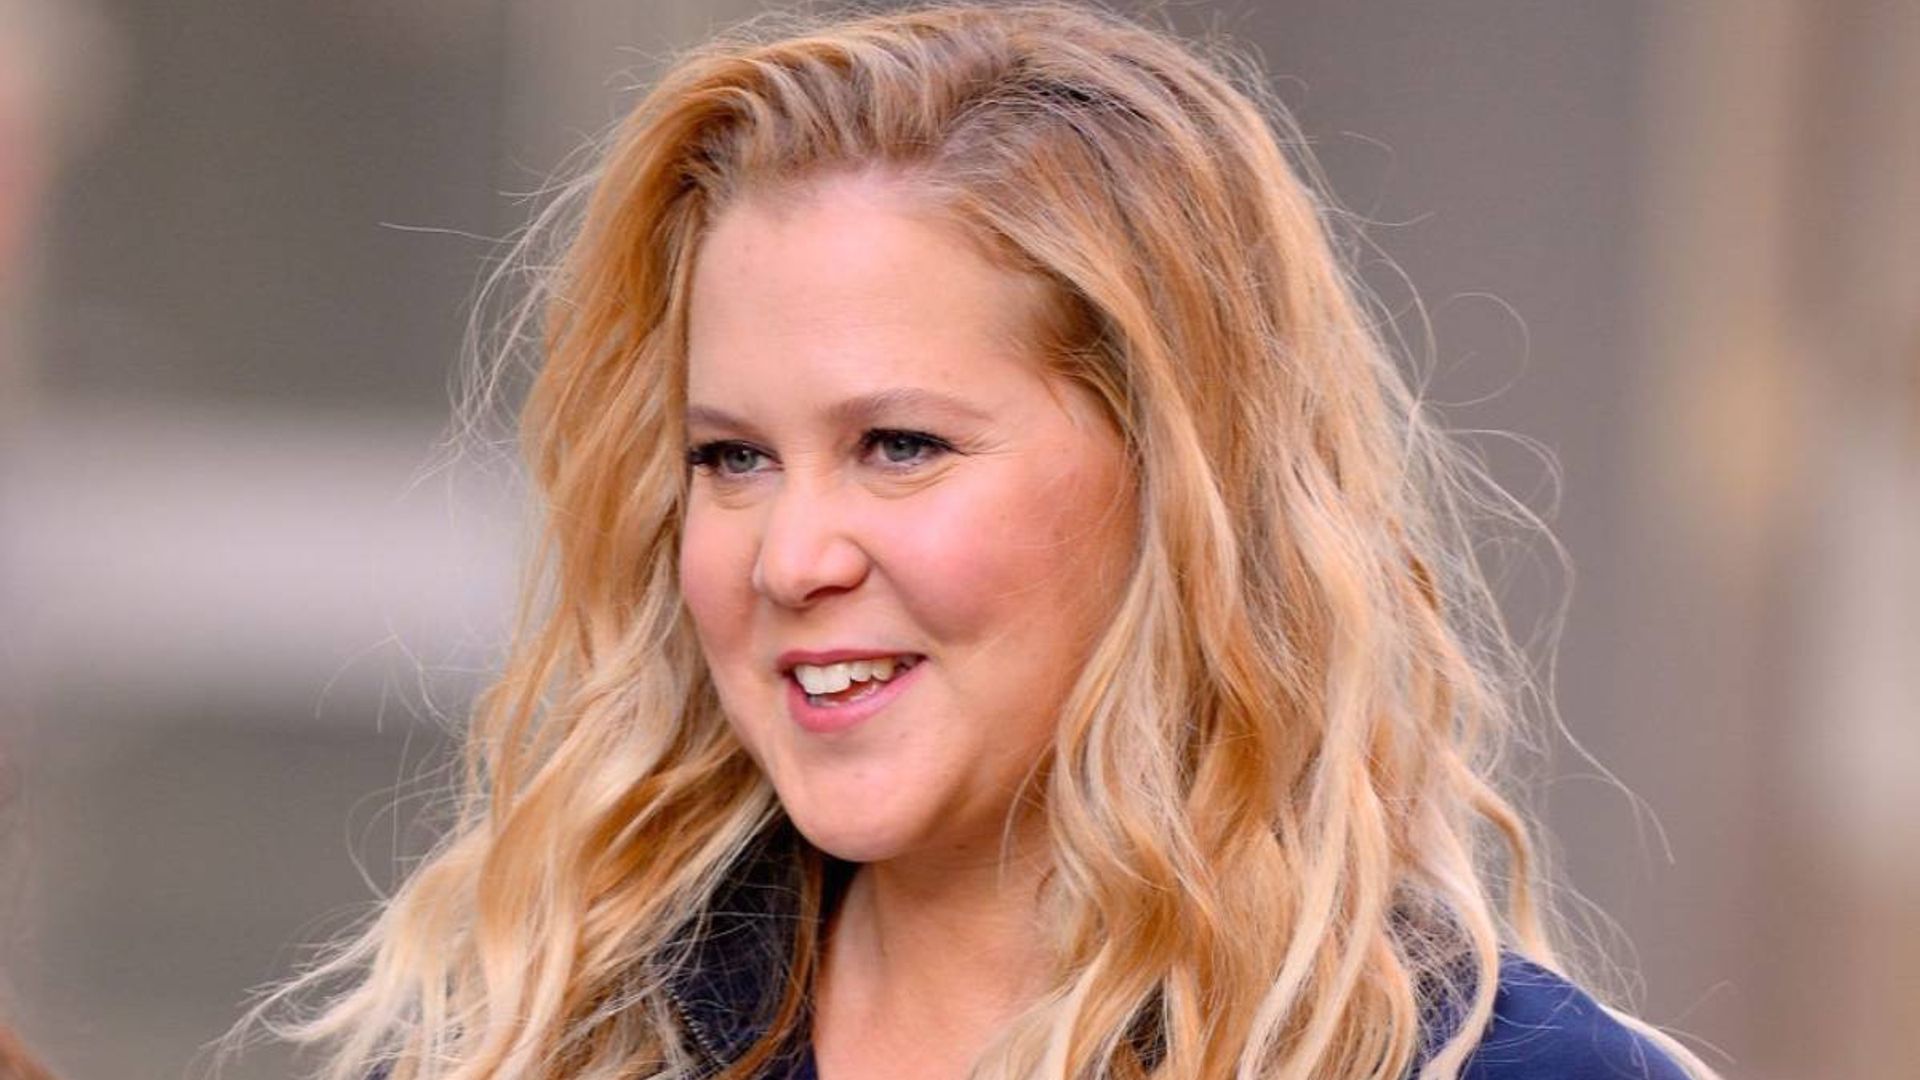 Amy Schumer confuses fans with hilarious pregnancy photo